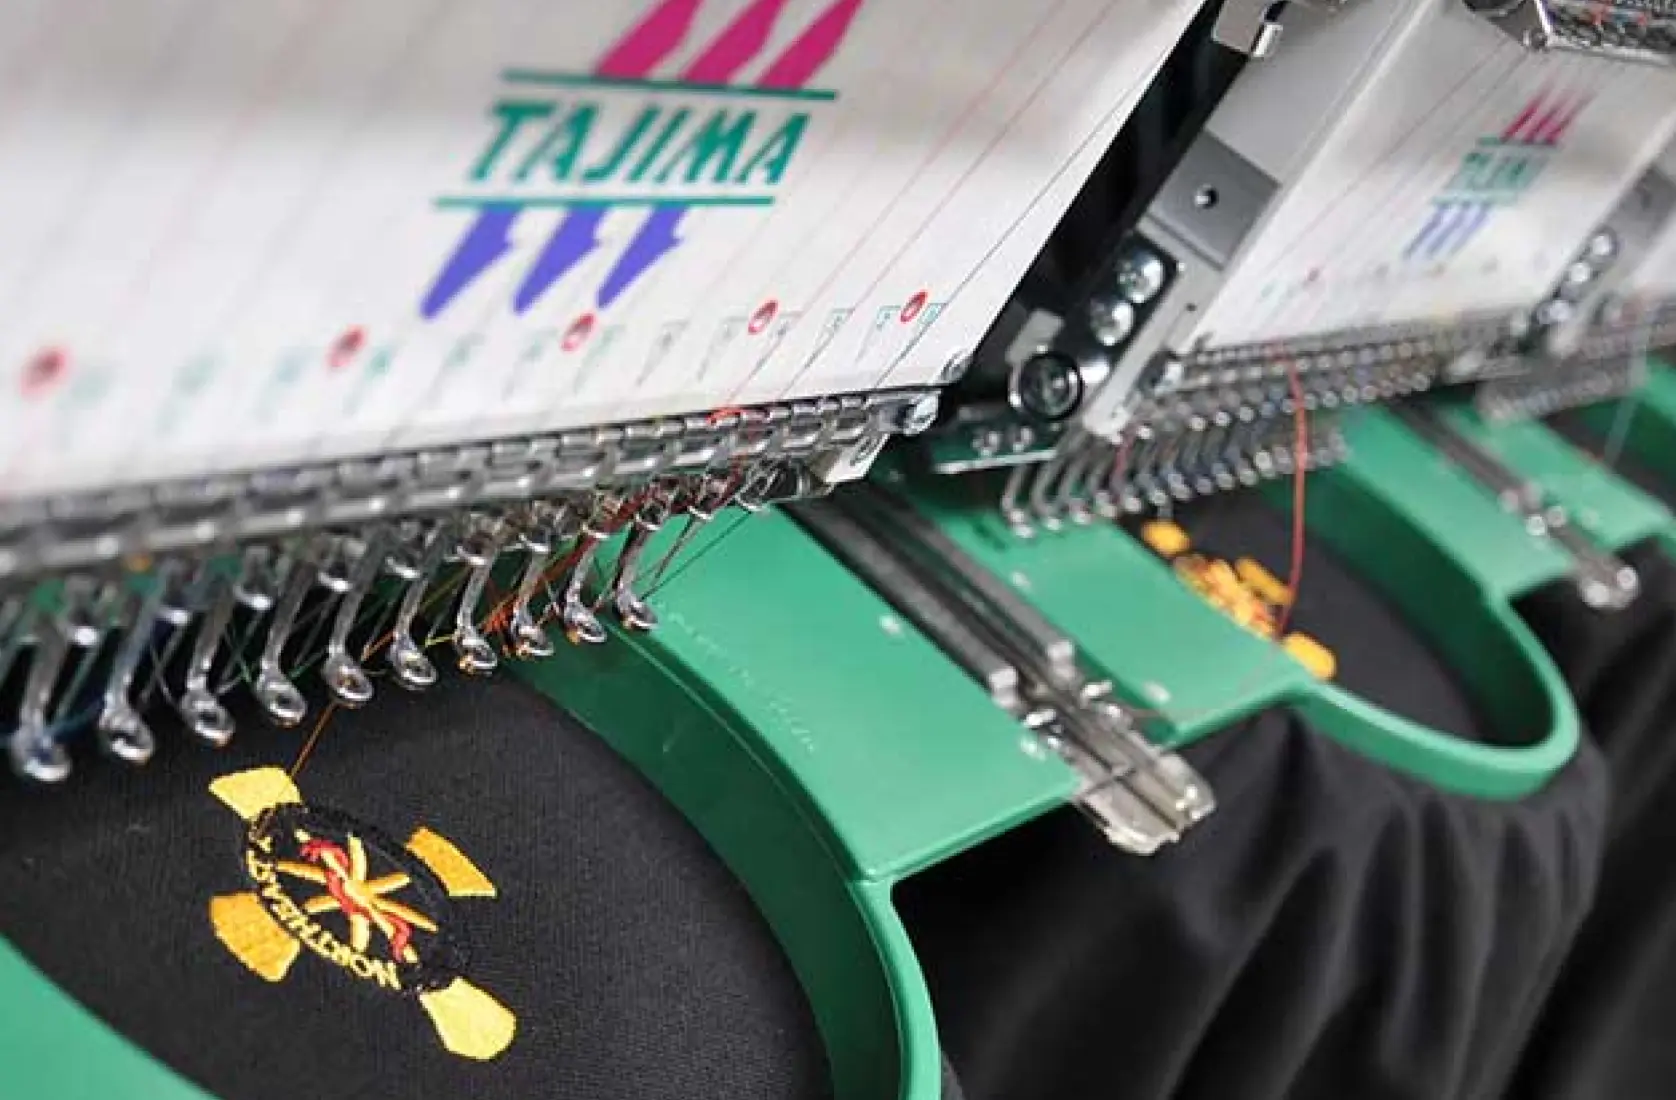 Embroidery machine manufacturing